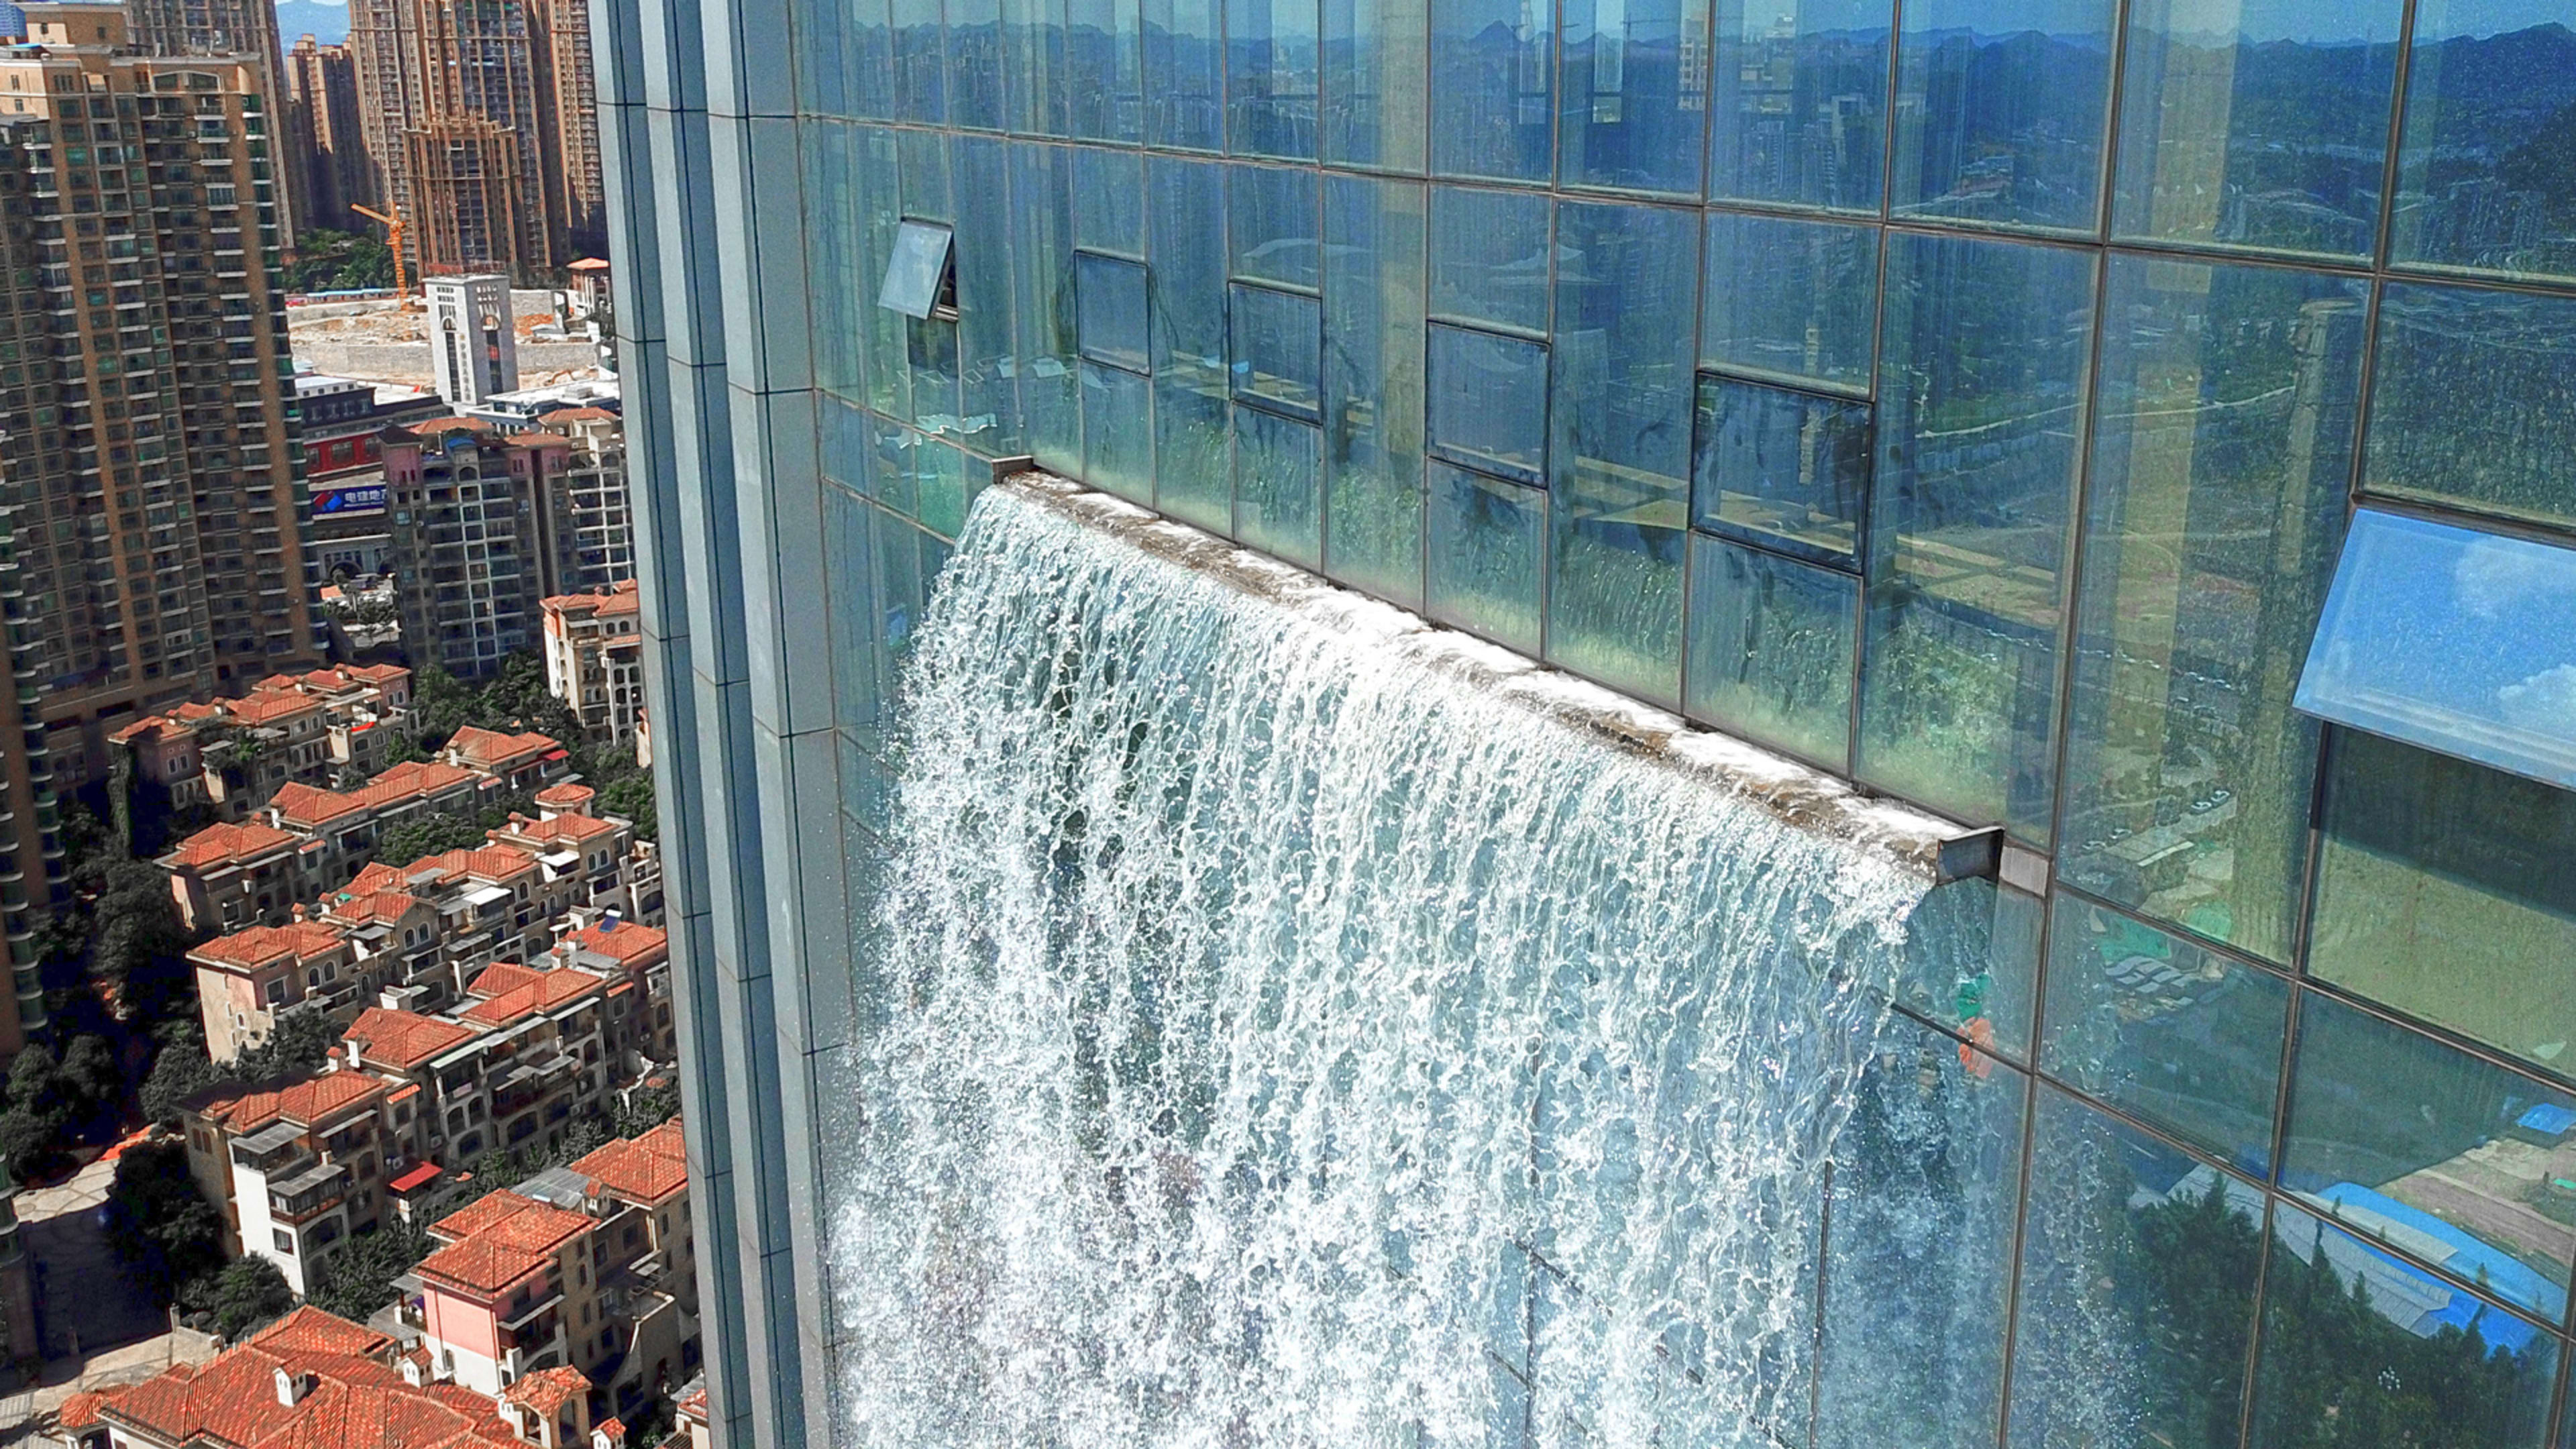 This wild new skyscraper is topped with a functioning waterfall